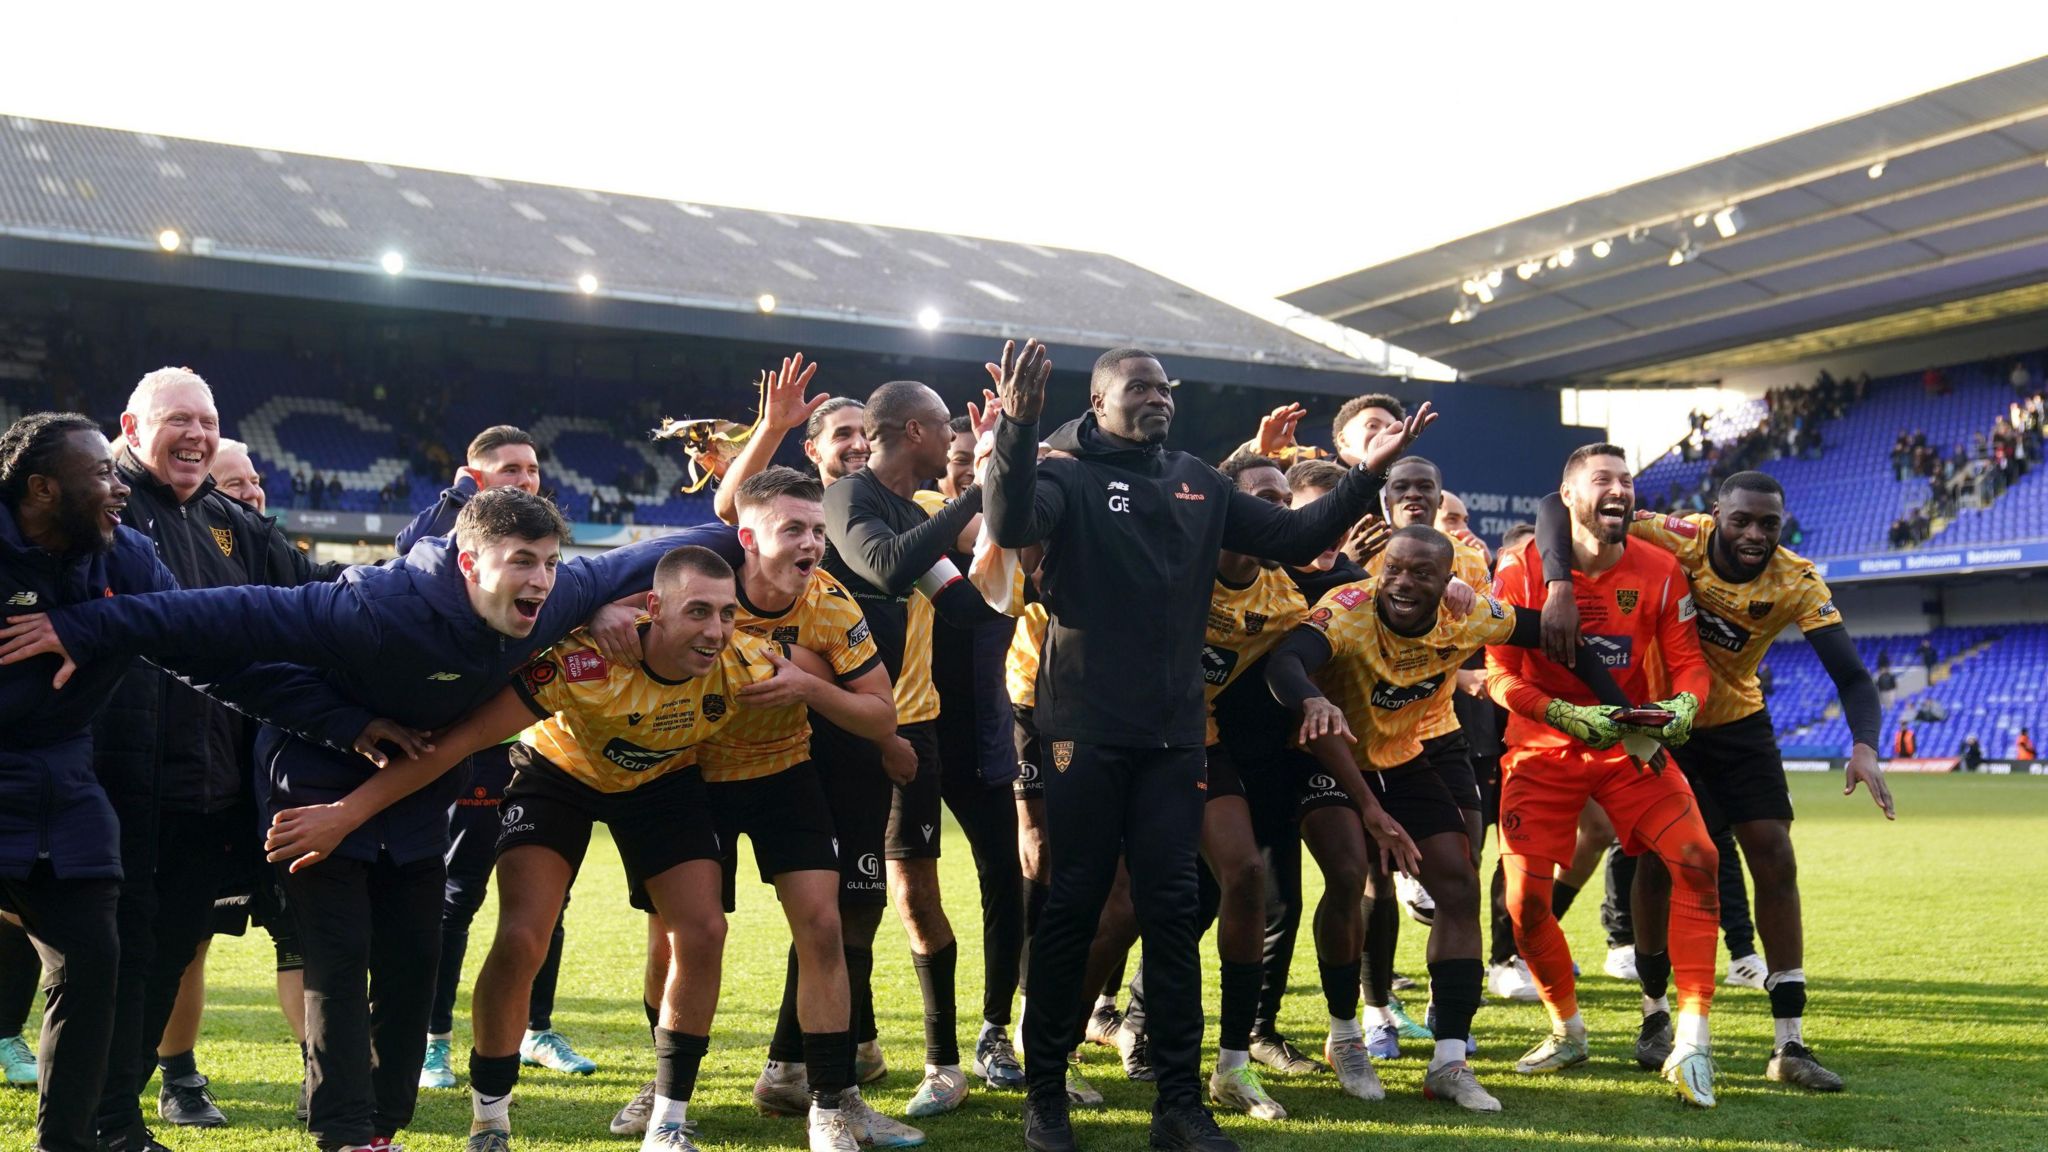 Maidstone United's players and management celebrate on the pitch at Portman Road in front of their fans